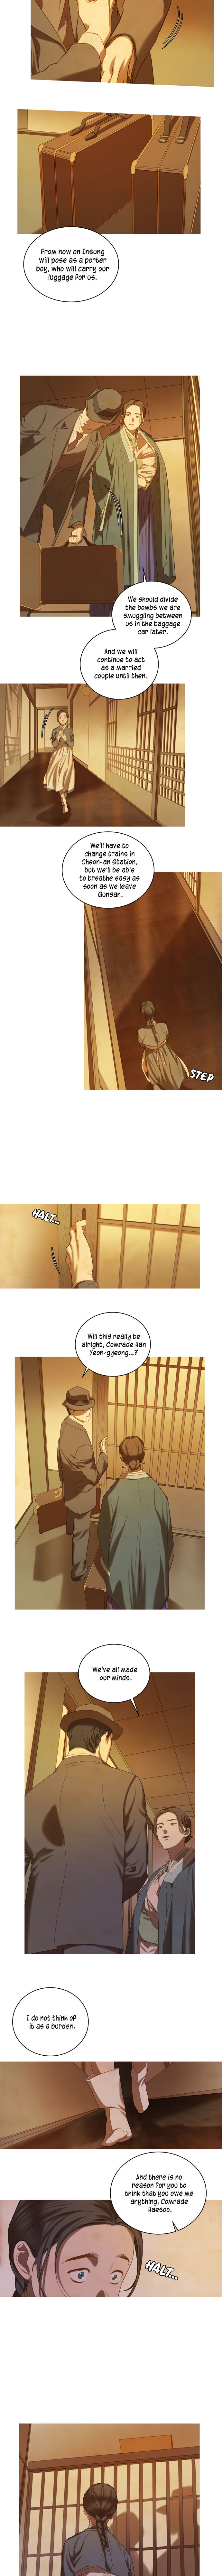 The Whale Star - The Gyeongseong Mermaid - Chapter 7 Page 3